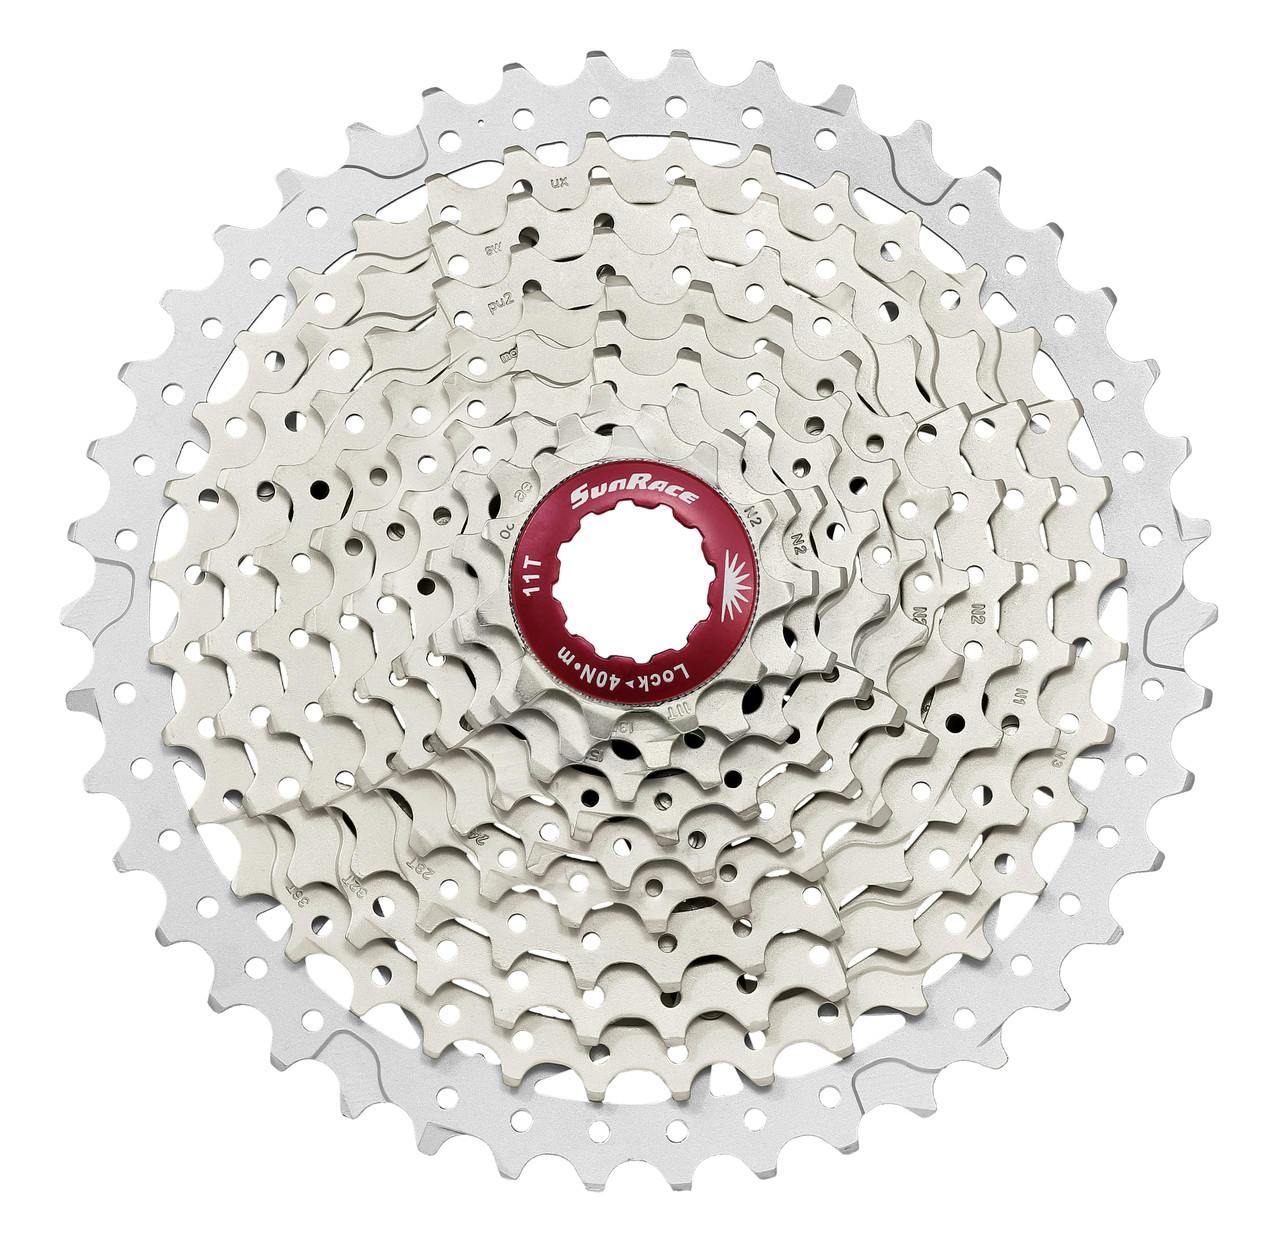 MX3 10 Speed 11-42T Cassette Champagne